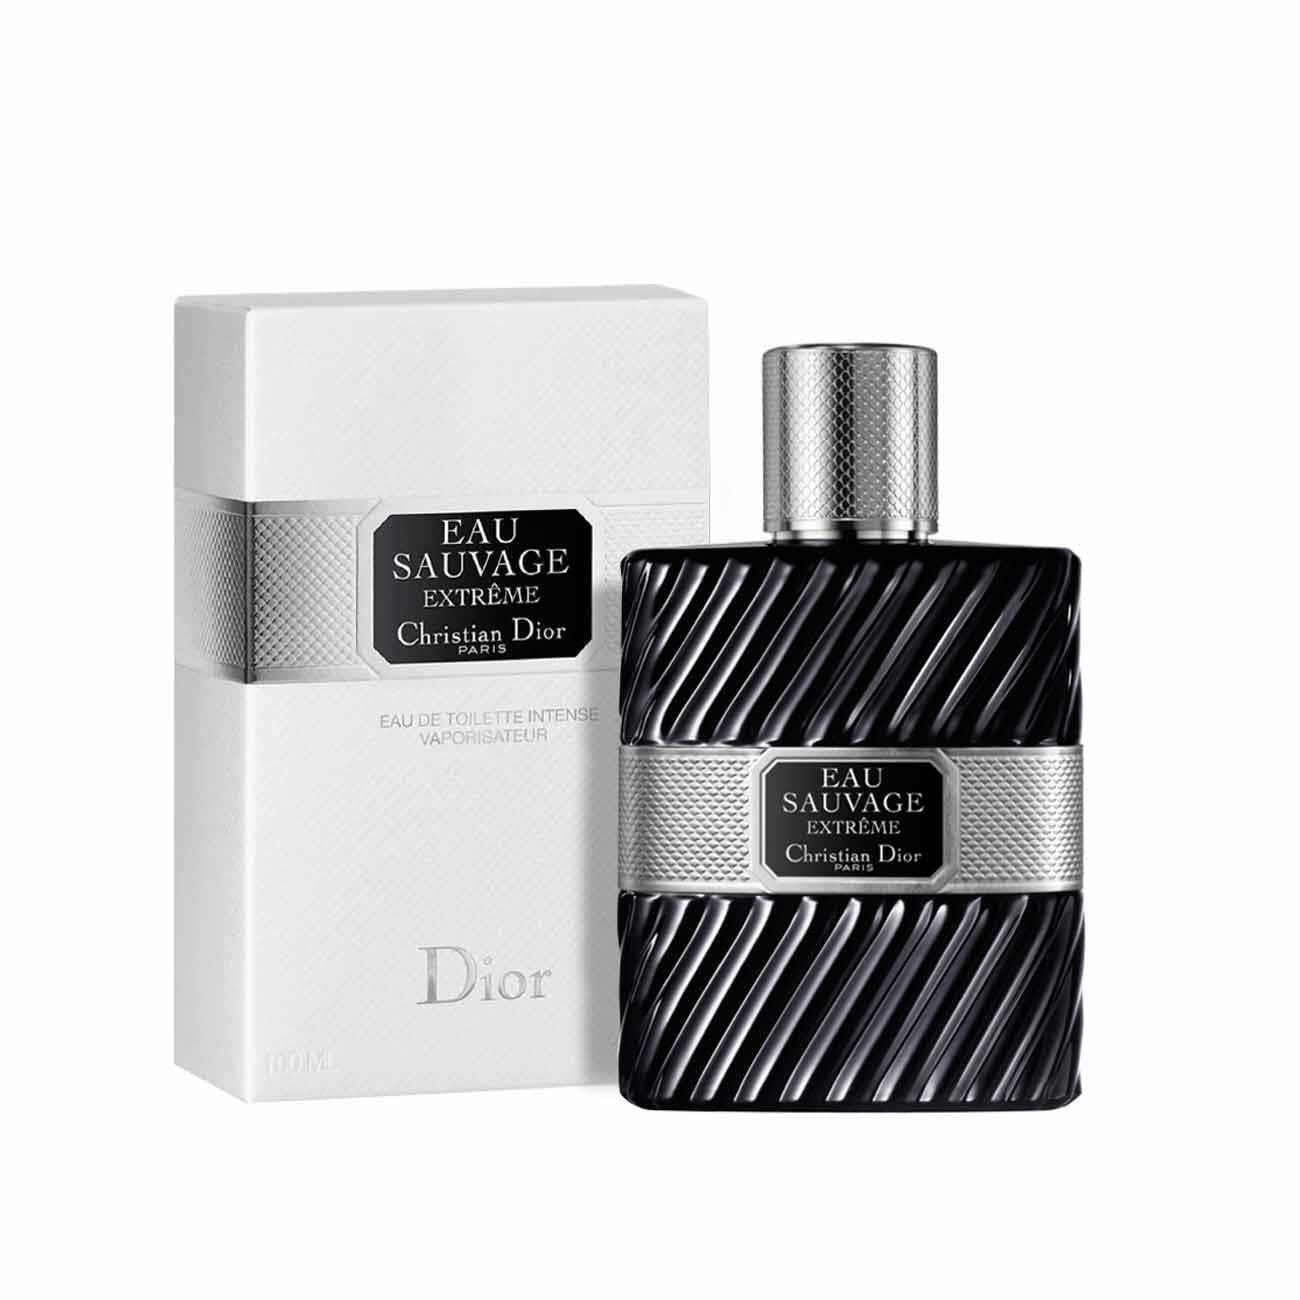 Eau Sauvage Extreme by Dior